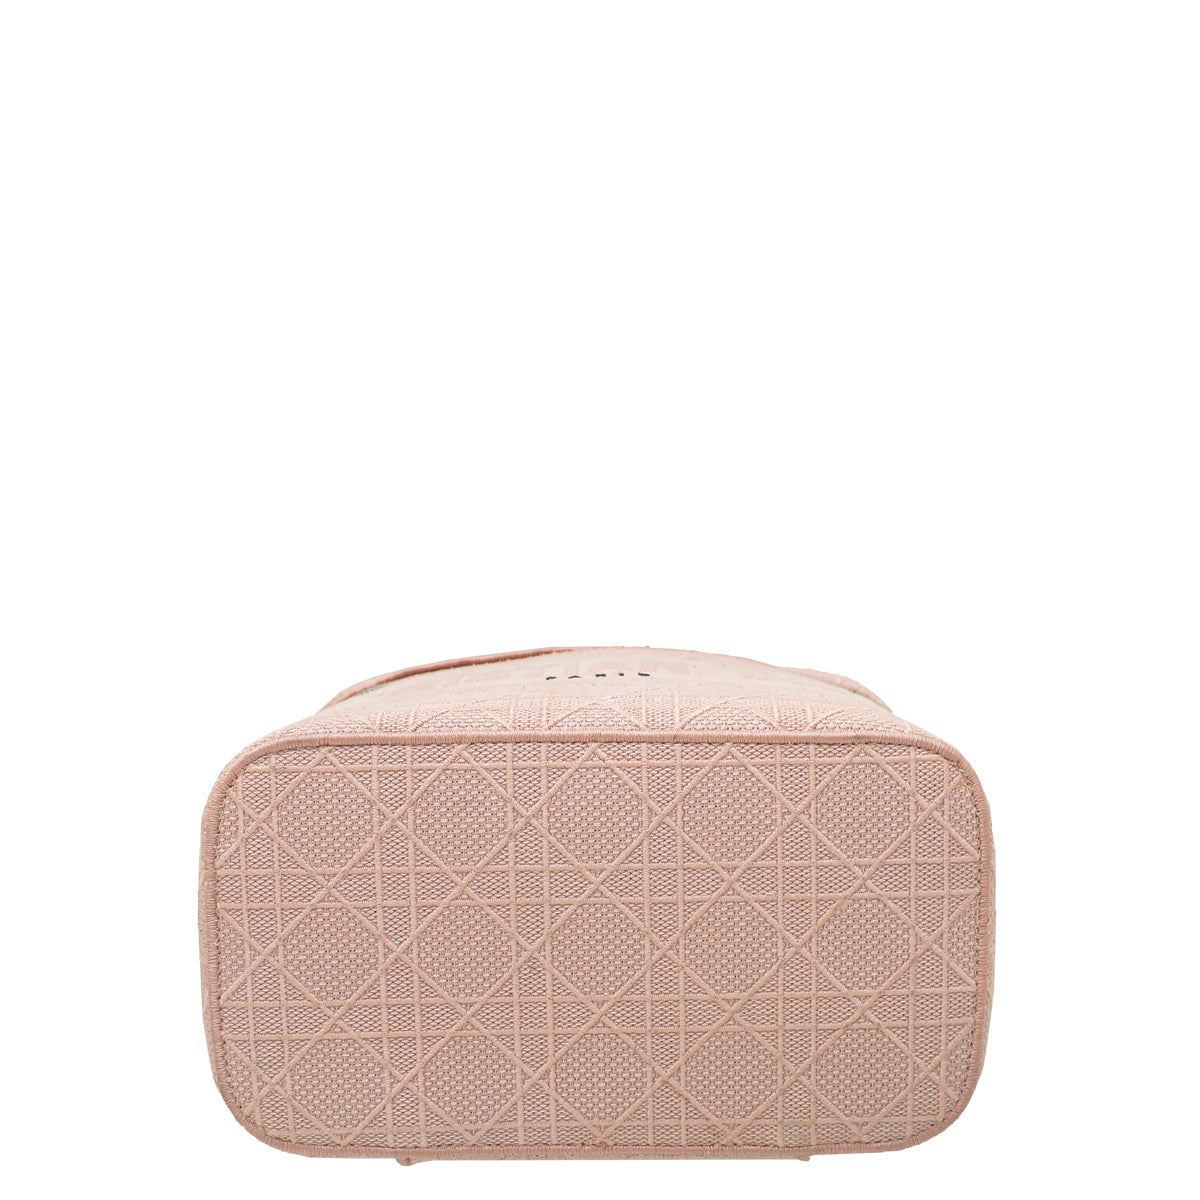 Travel bag Christian Dior Pink in Plastic - 31157269